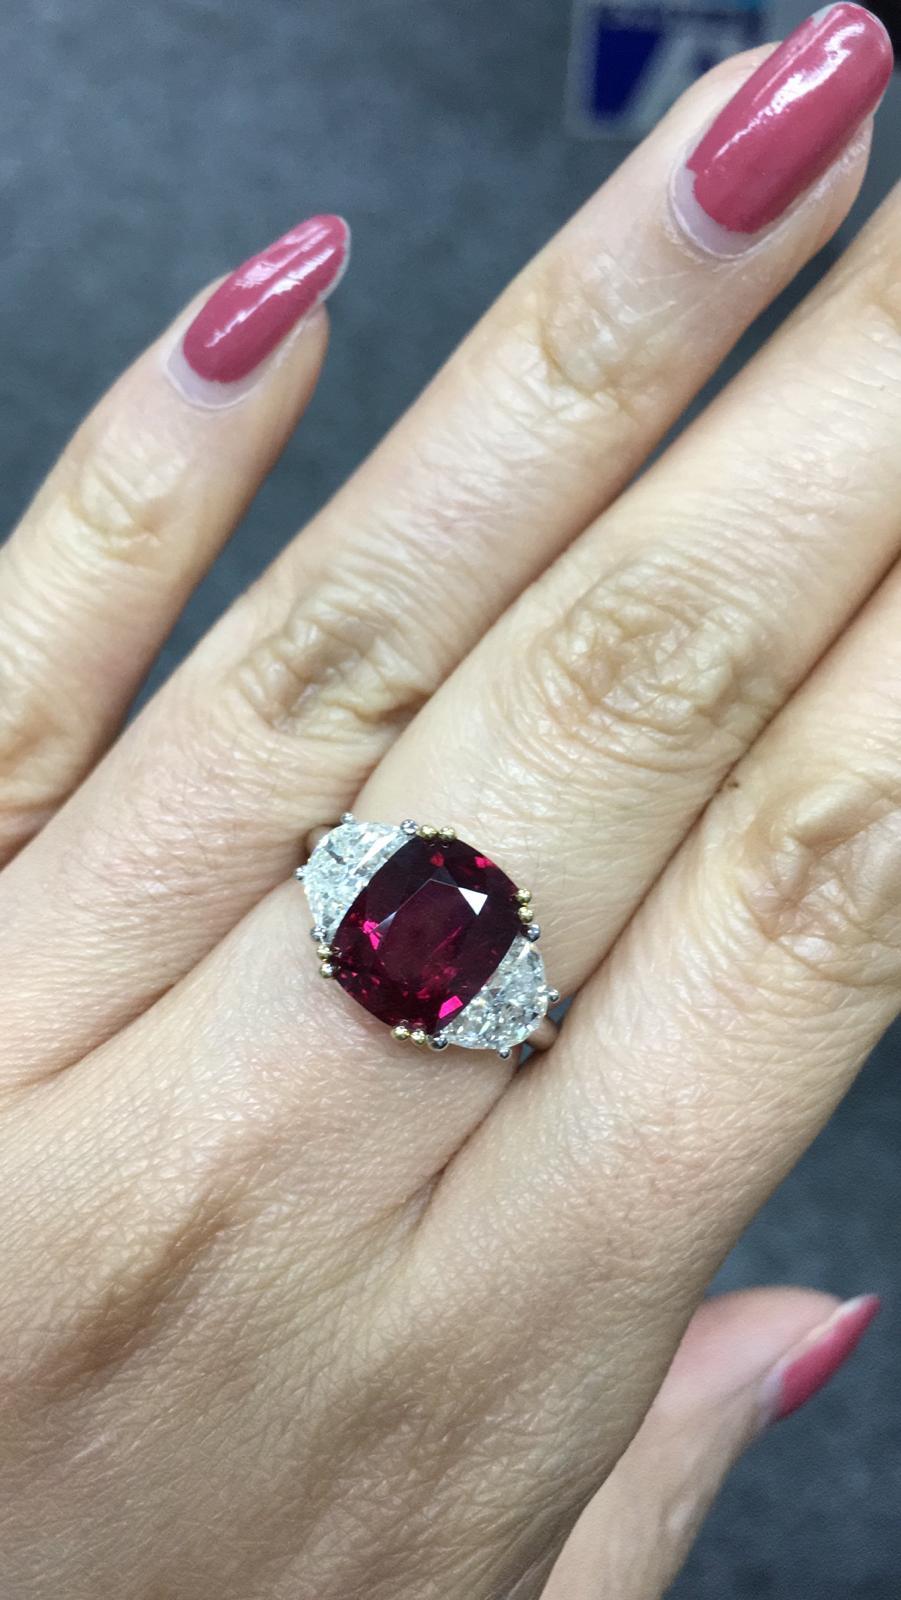 Primary Stone: Ruby (Madagascar) VIVID RED PIGEON BLOOD 
Shape : Cushion Cut
Ruby Weight: 4.58 Carats 
Measurements Ruby : 10.60mm x 8.44mm x 4.97mm
Color: Vivid Red Pigeon Blood 
Accent Stones: Genuine Diamond
Shape Or Cut Diamond: 2 Half Moon